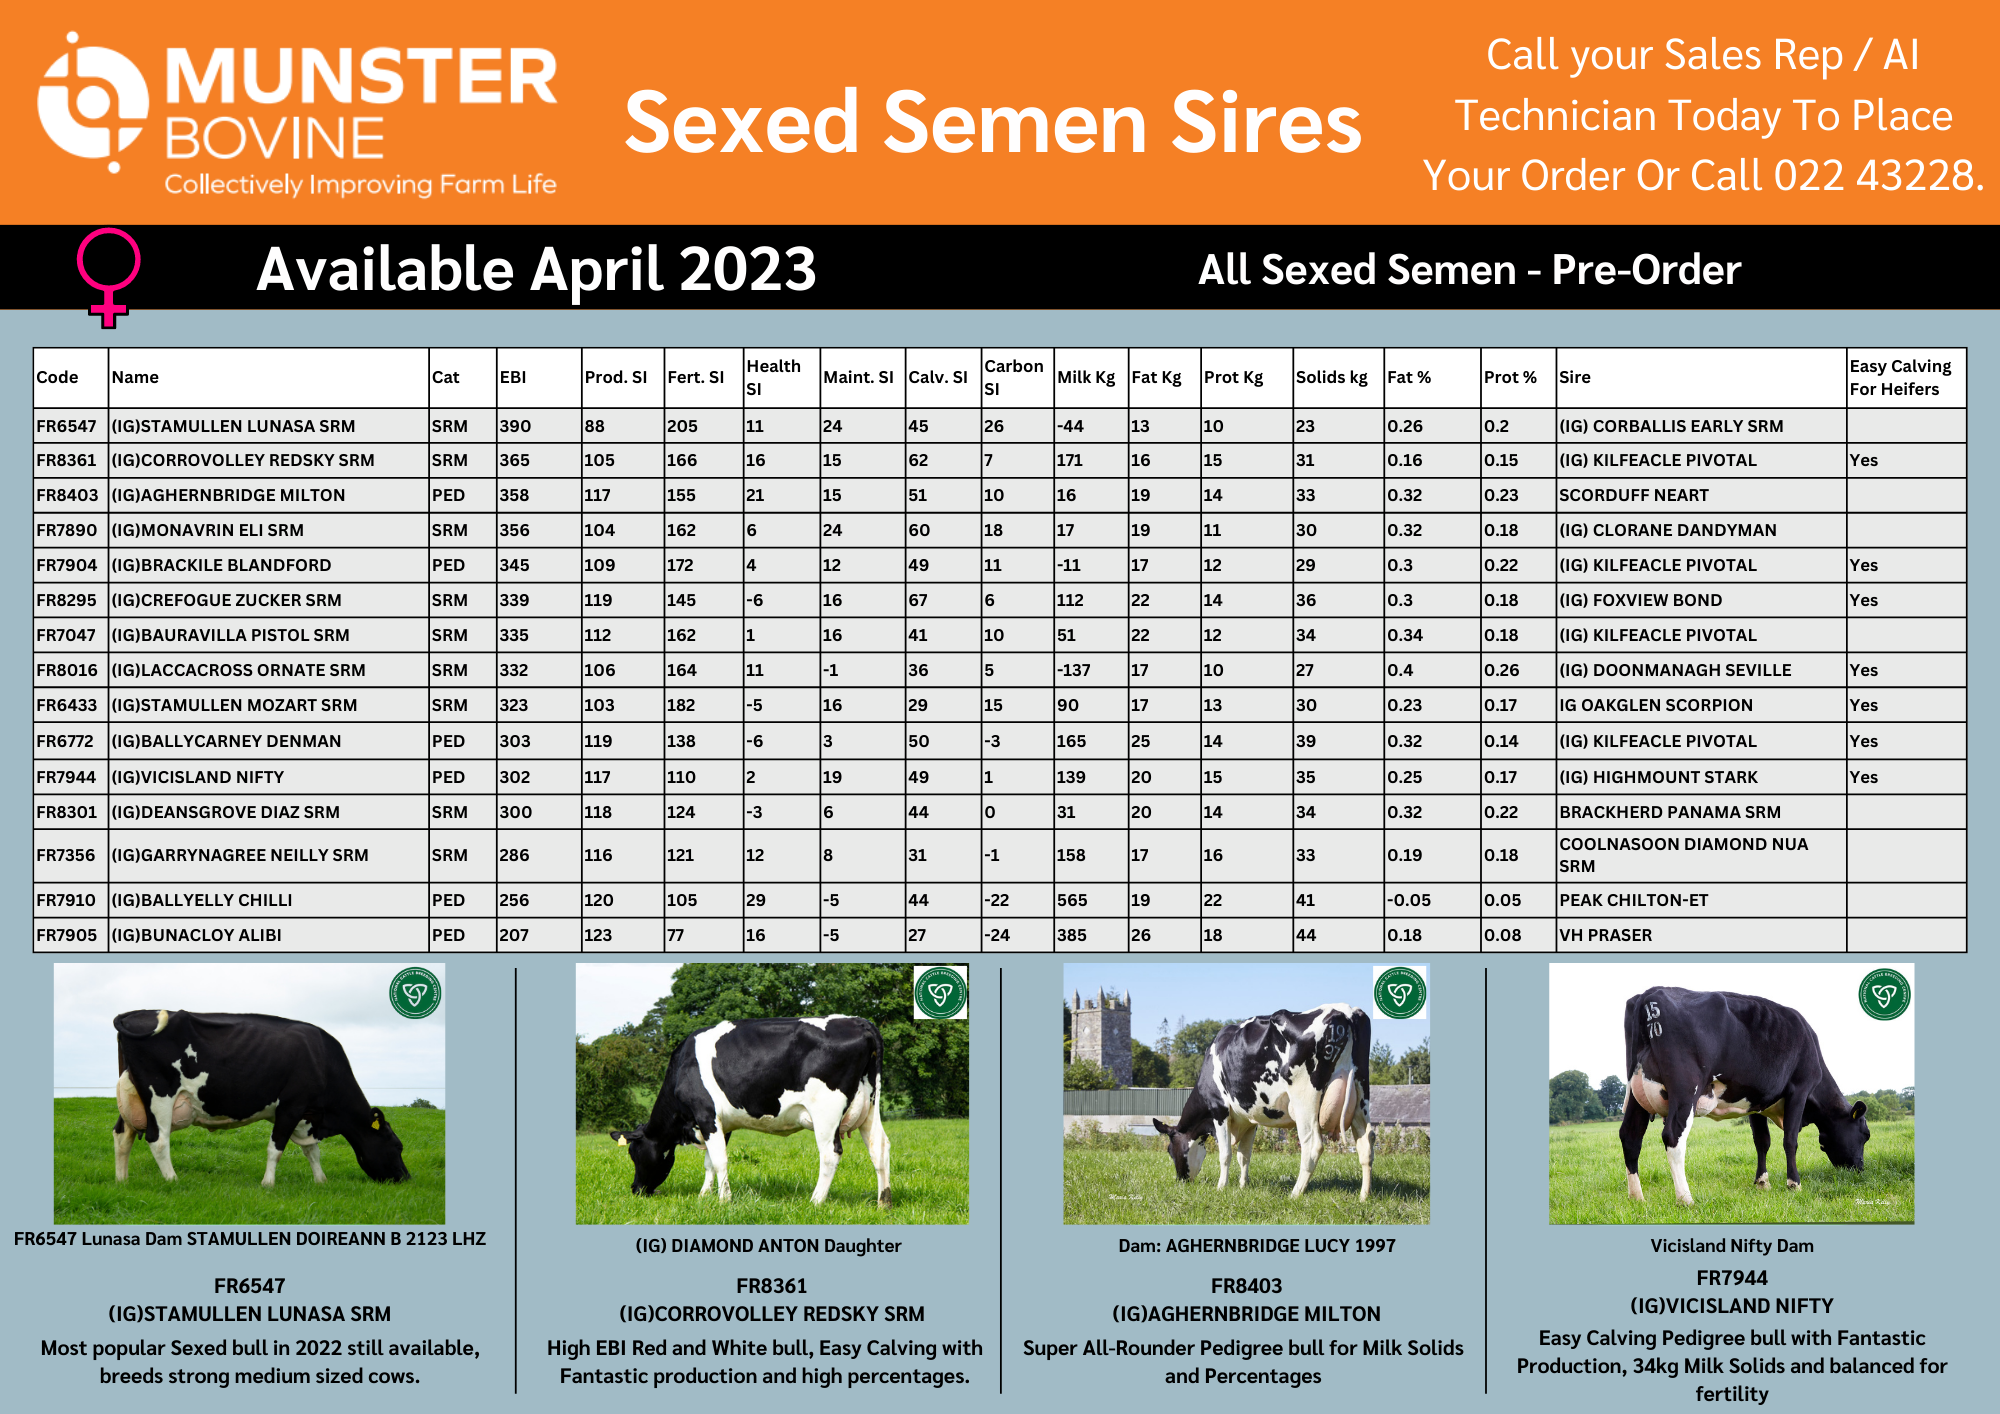 Sexed Semen Sires Available For April 2023 (1)